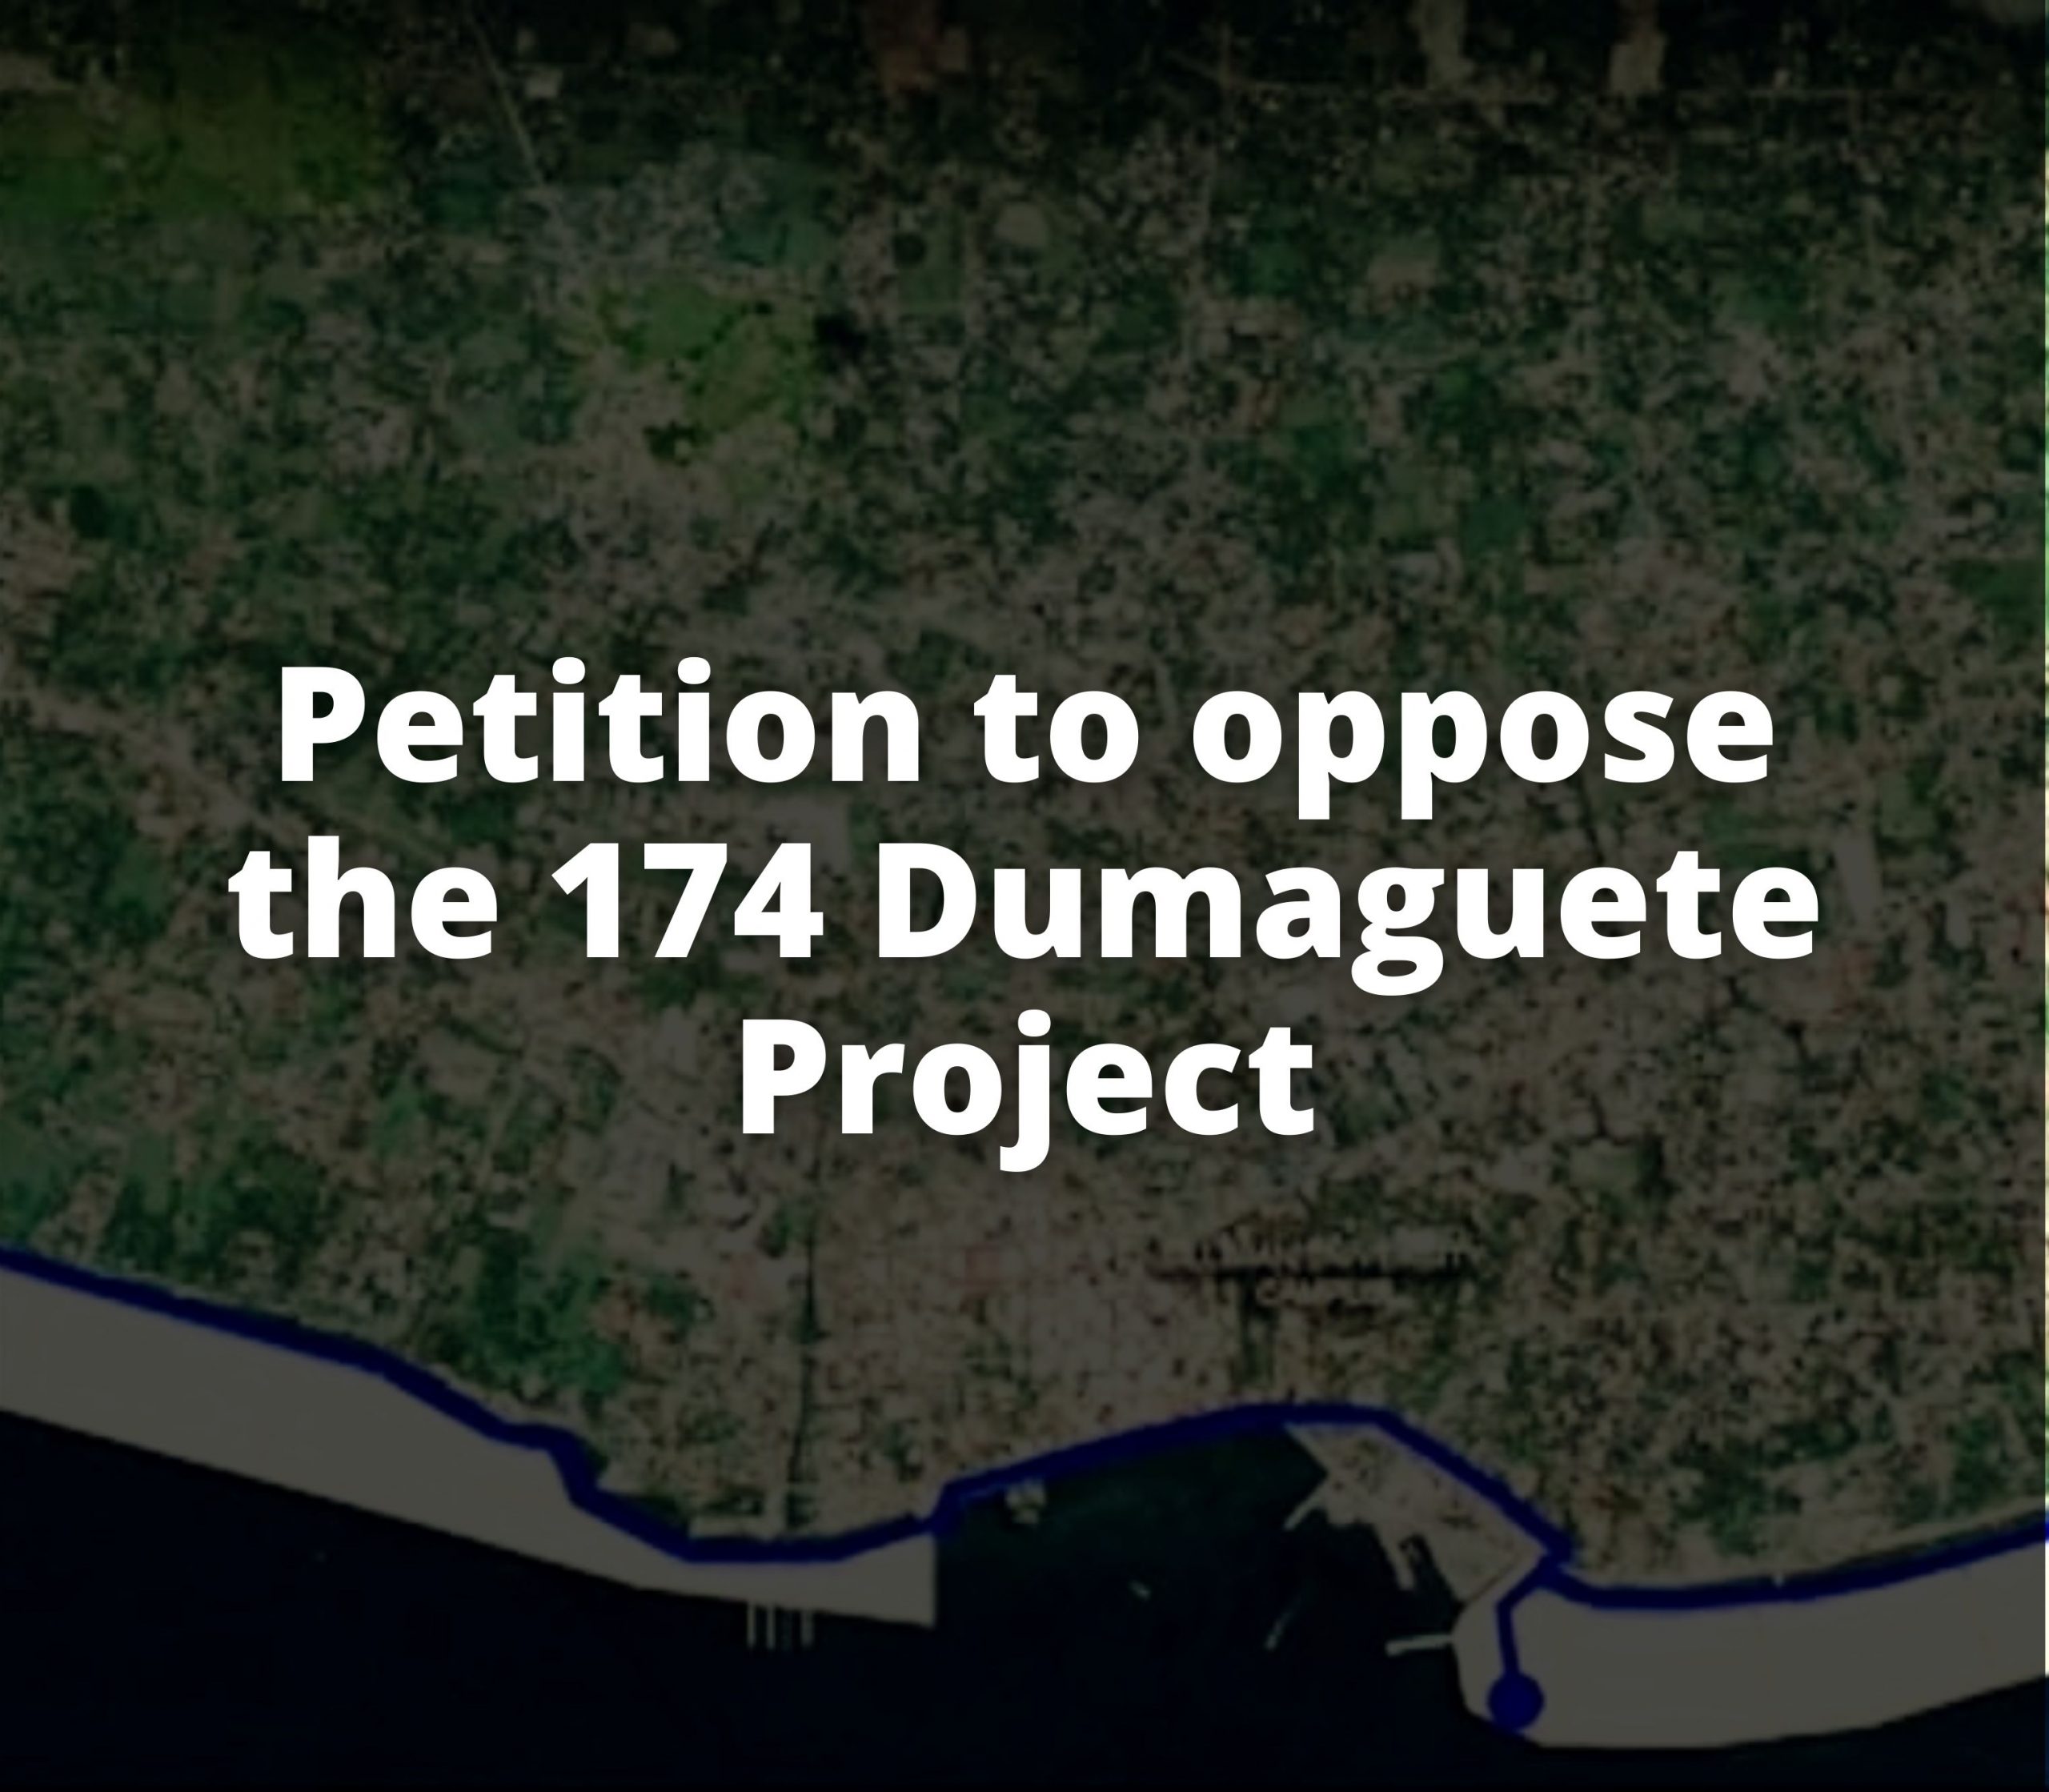 Petition to oppose the 174 Dumaguete Project